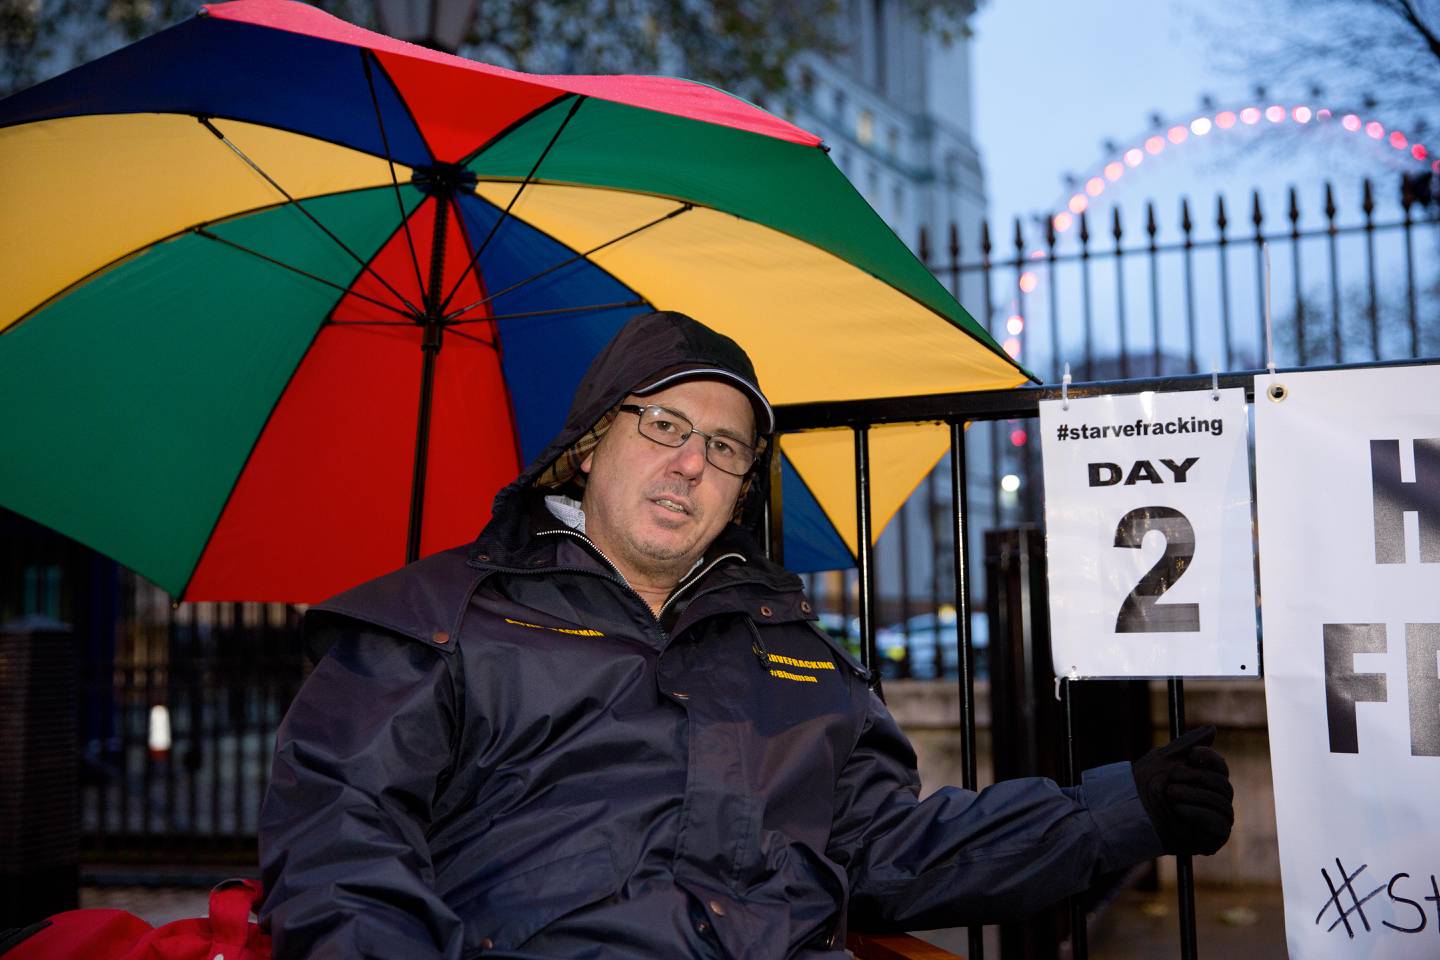 Vaccine sceptic Geza Tarjanyi, also known a Gayzer Frackman, was arrested on the doorstep of Health Secretary Sajid Javid's home in Fulham, south London. Photo: Mark Kerrison/Alamy Live News